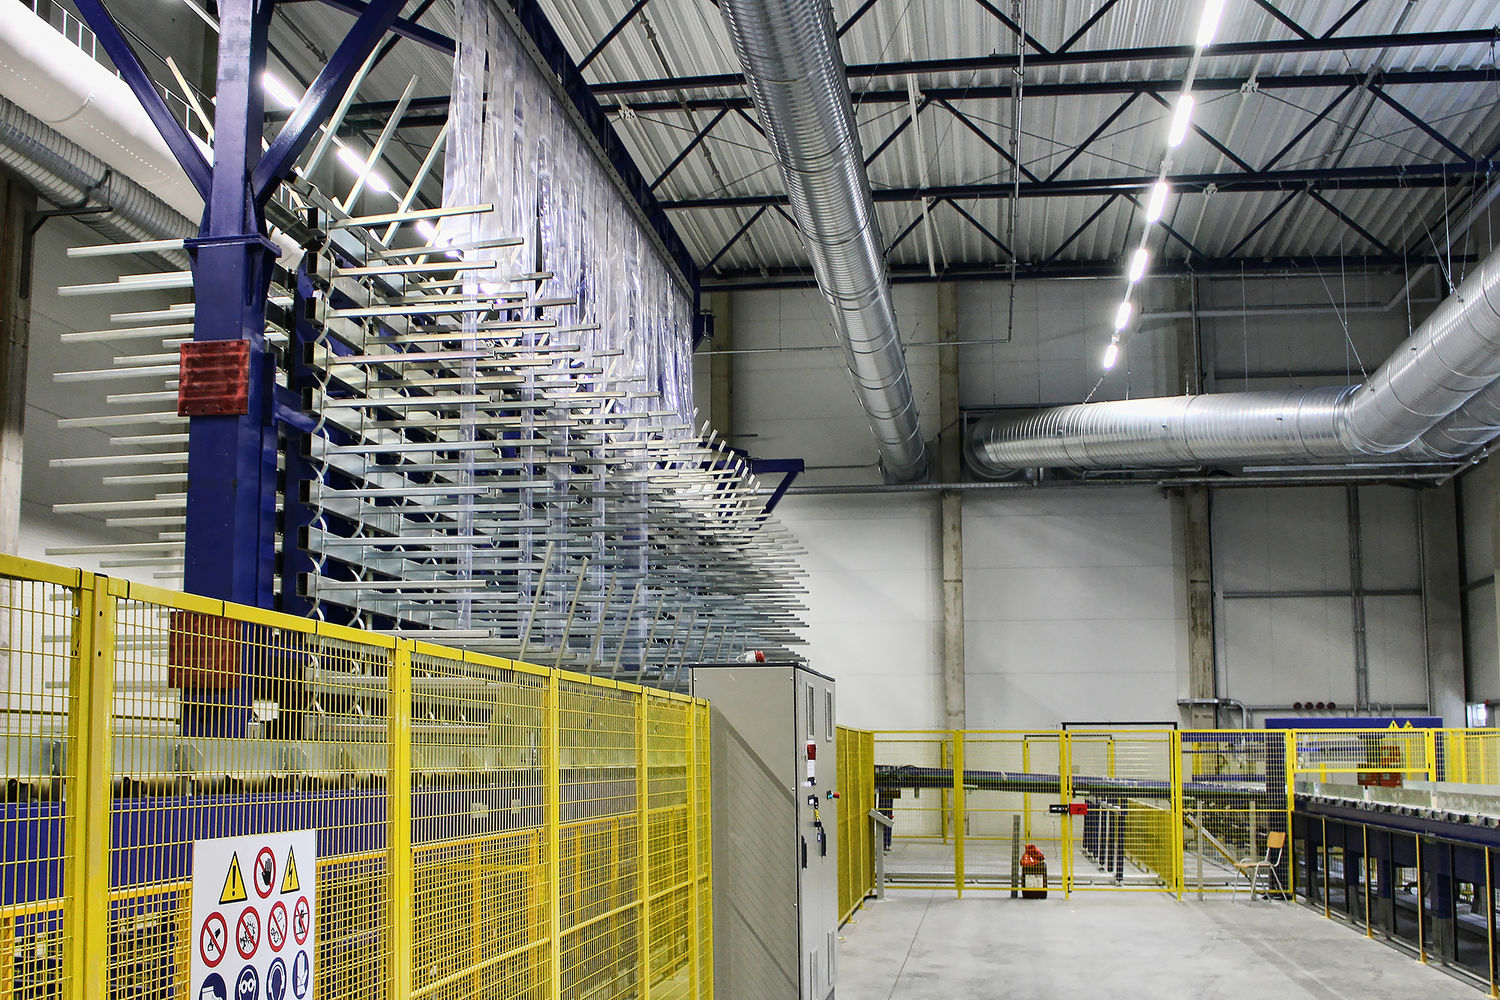 SCM Group: another success achieved with Kingspan in Germany.